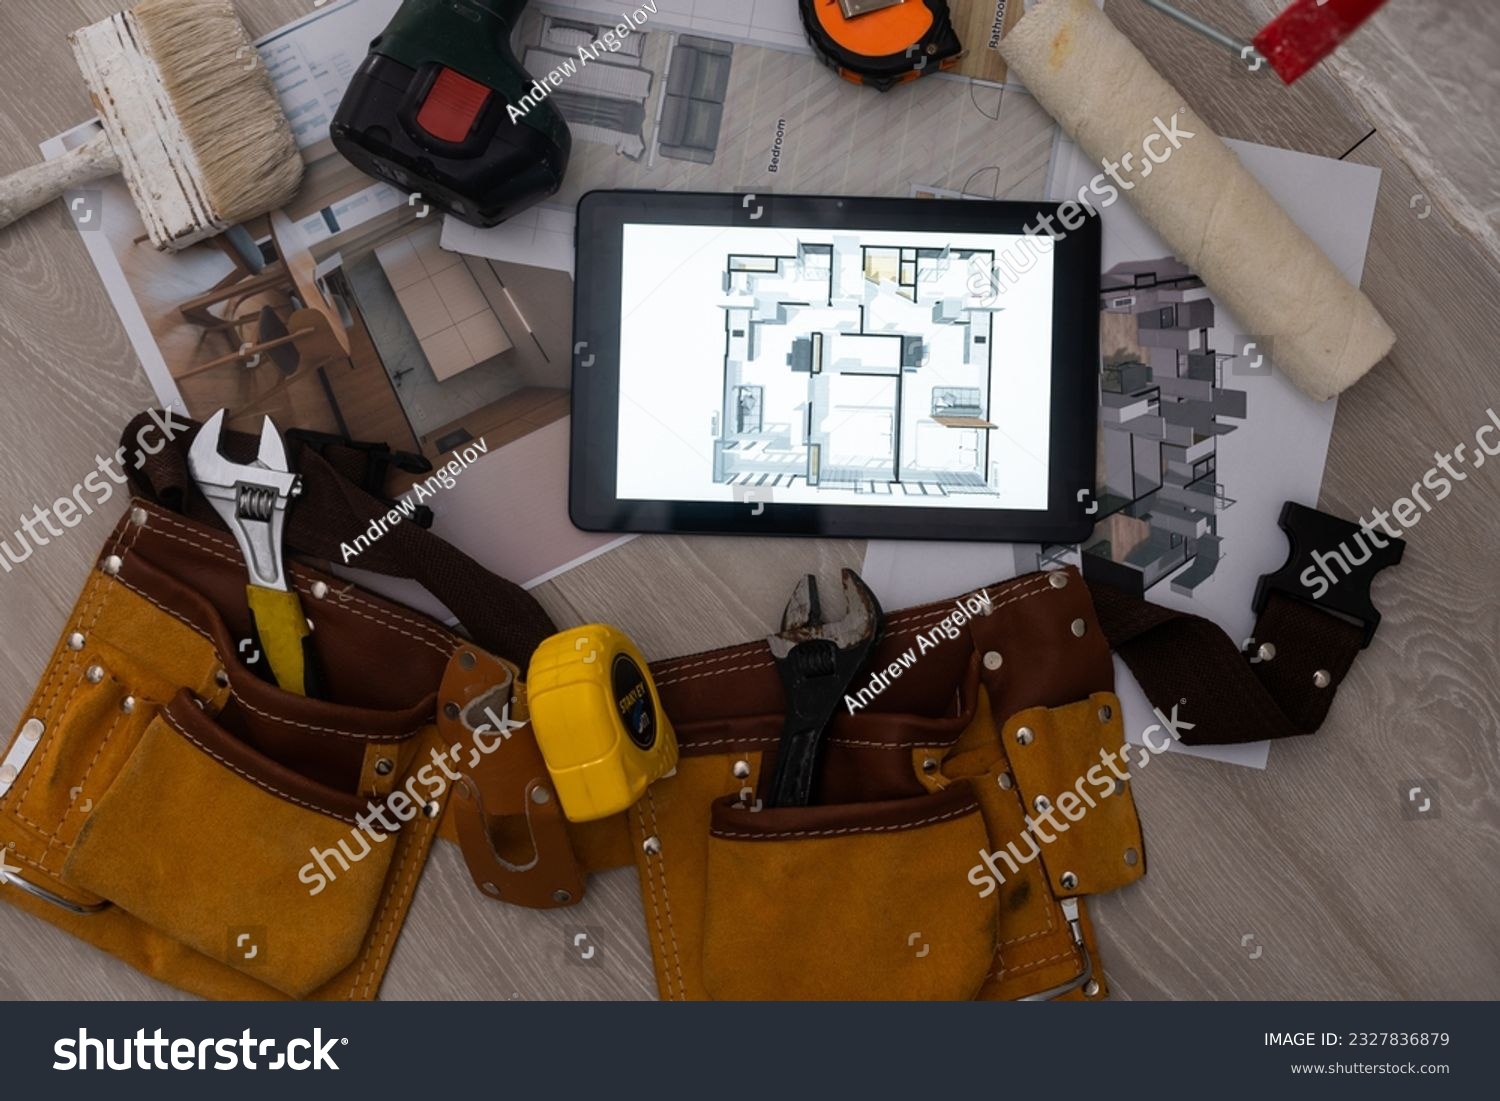 Computer Tablet Showing apartment Illustration Sitting On House Plans. tools #2327836879